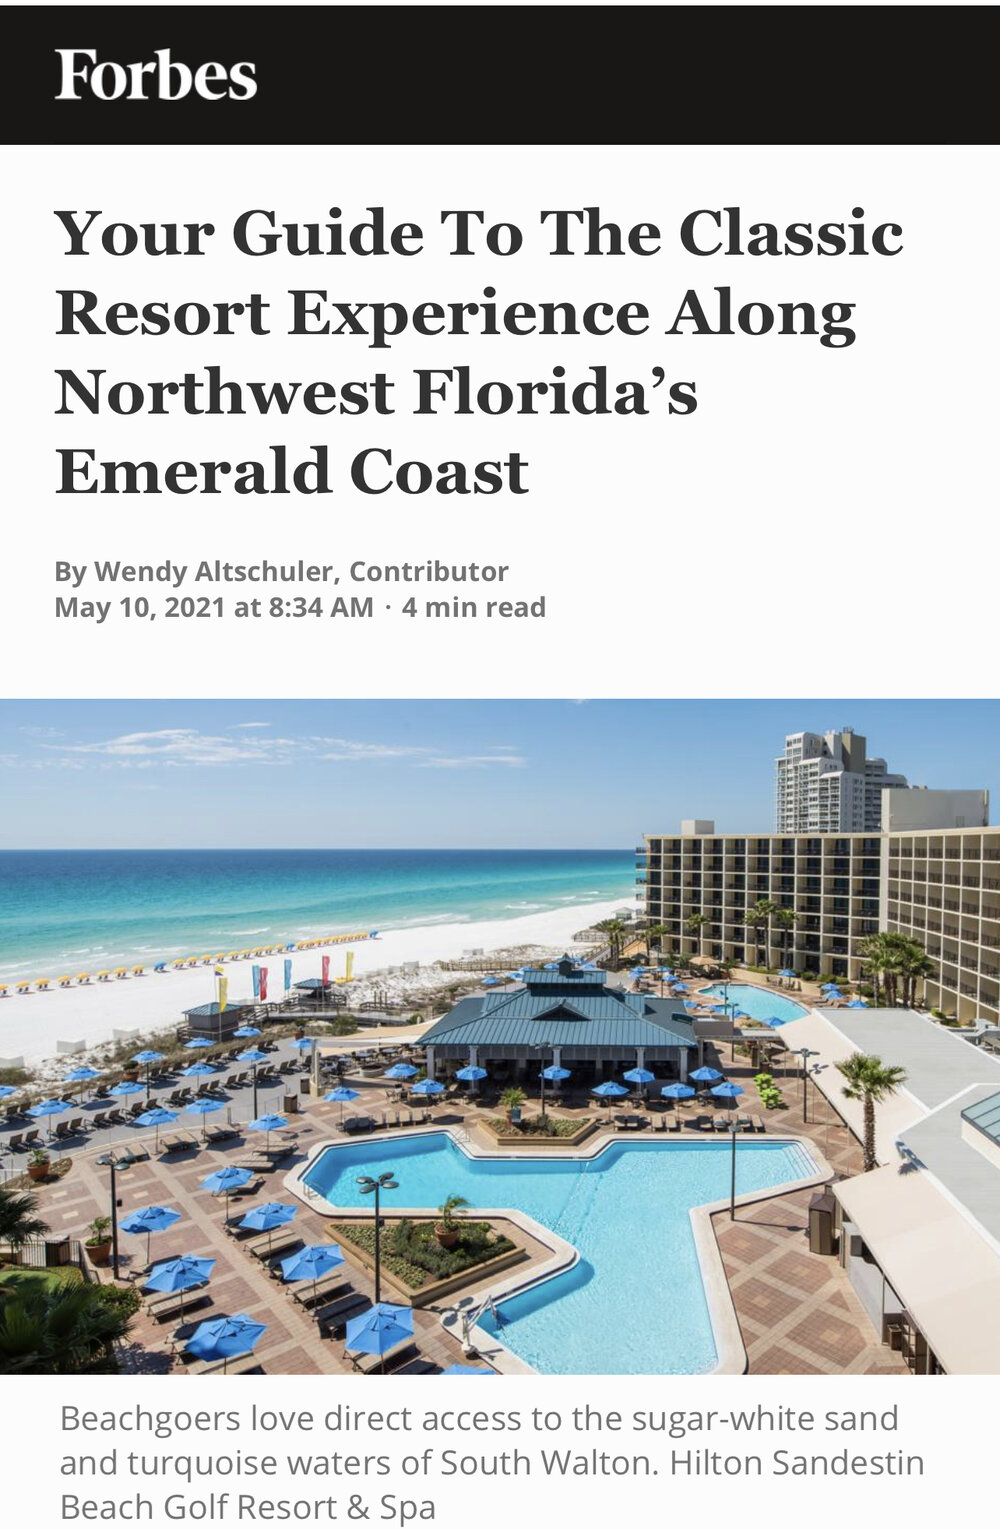 Your Guide To The Classic Resort Experience Along Northwest Florida’s Emerald Coast